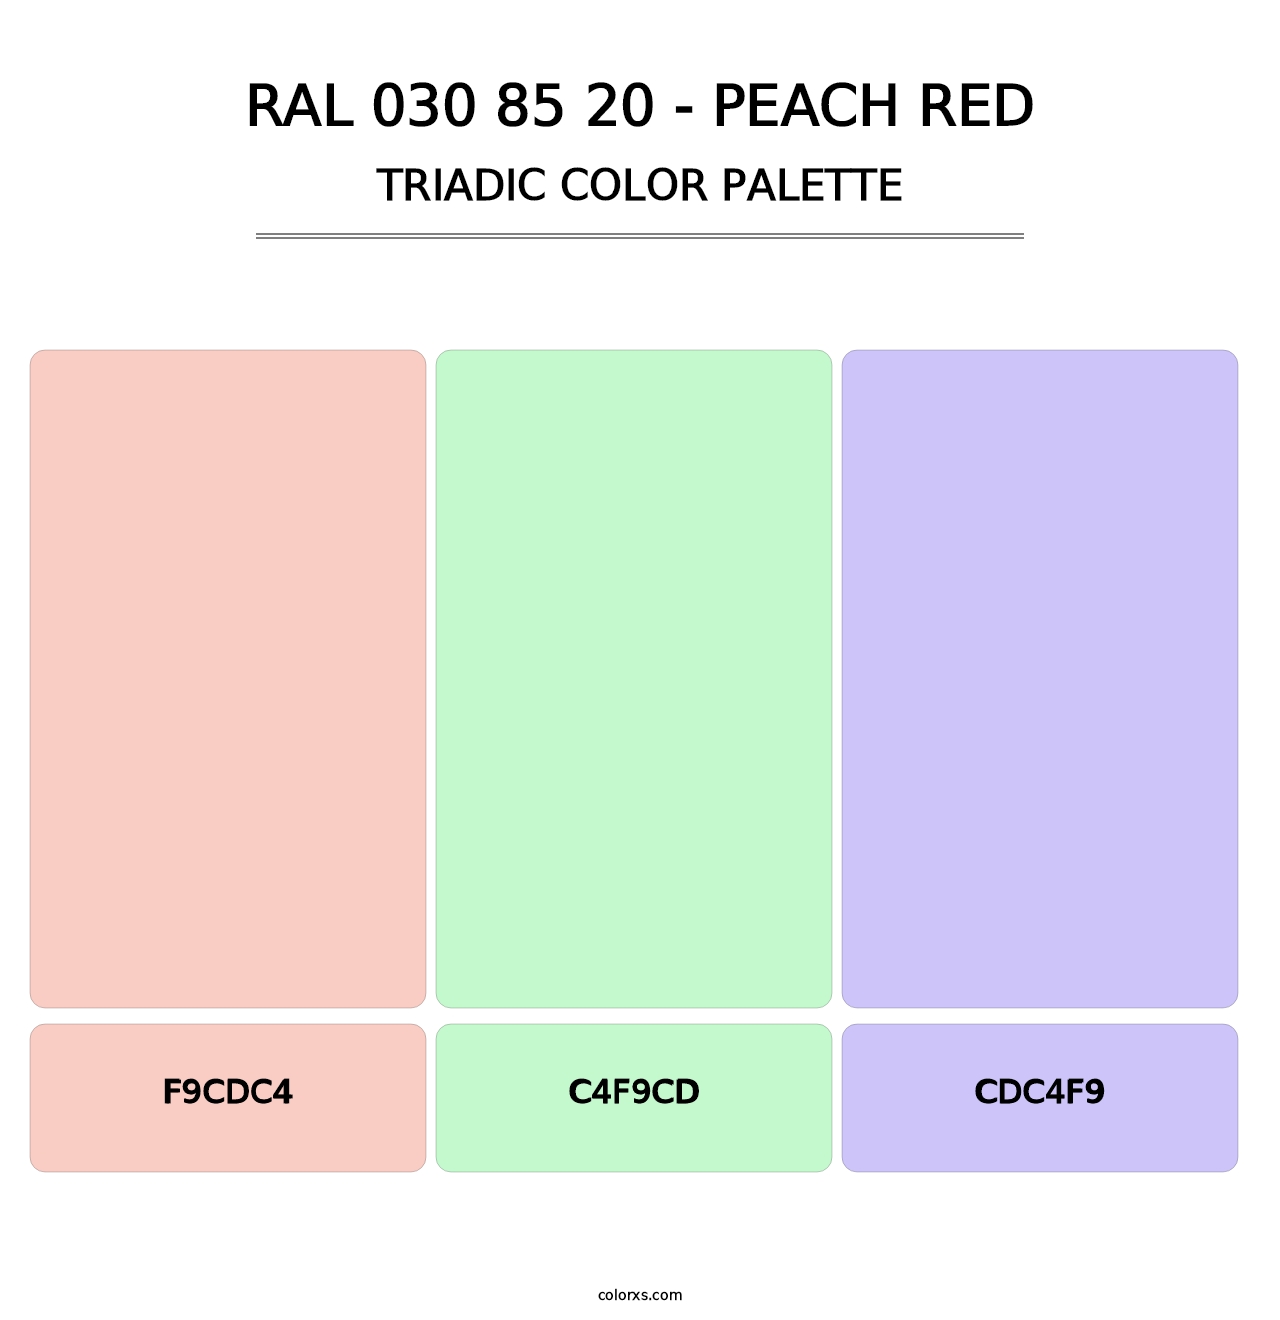 RAL 030 85 20 - Peach Red - Triadic Color Palette